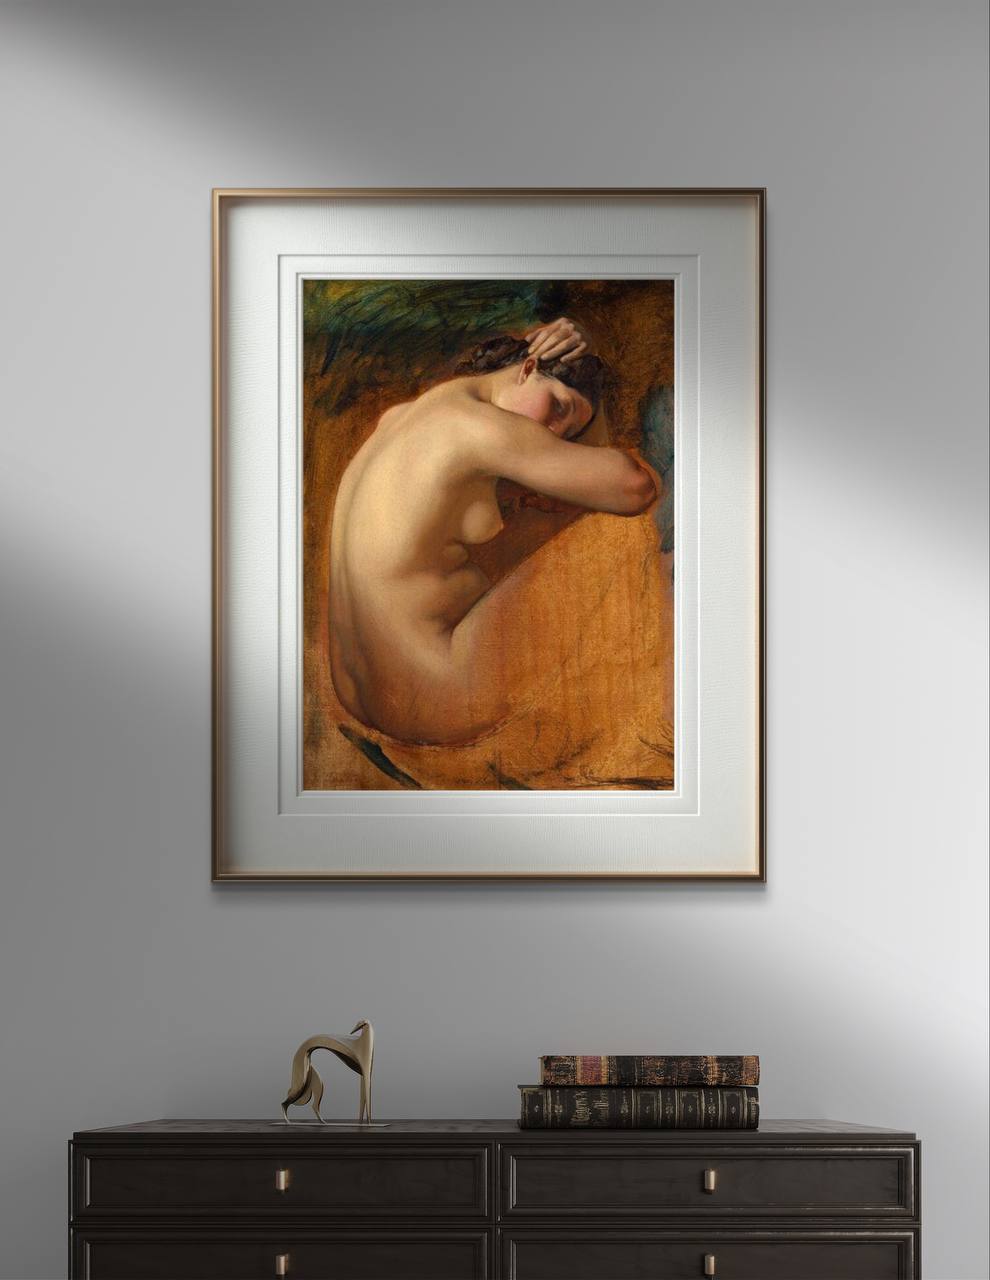 A refined presentation of "Study of a Female Nude" by Henri Lehmann, framed and showcased in a stylish room. The artwork depicts a nude woman with her head resting on her arms, using warm, inviting tones. This reproduction brings a sense of timeless elegance and classical artistry to any living space. Keywords: Wall Art, home decor, painting, art reproduction, famous artist, Poster, print, Henri Lehmann, Study of a Female Nude